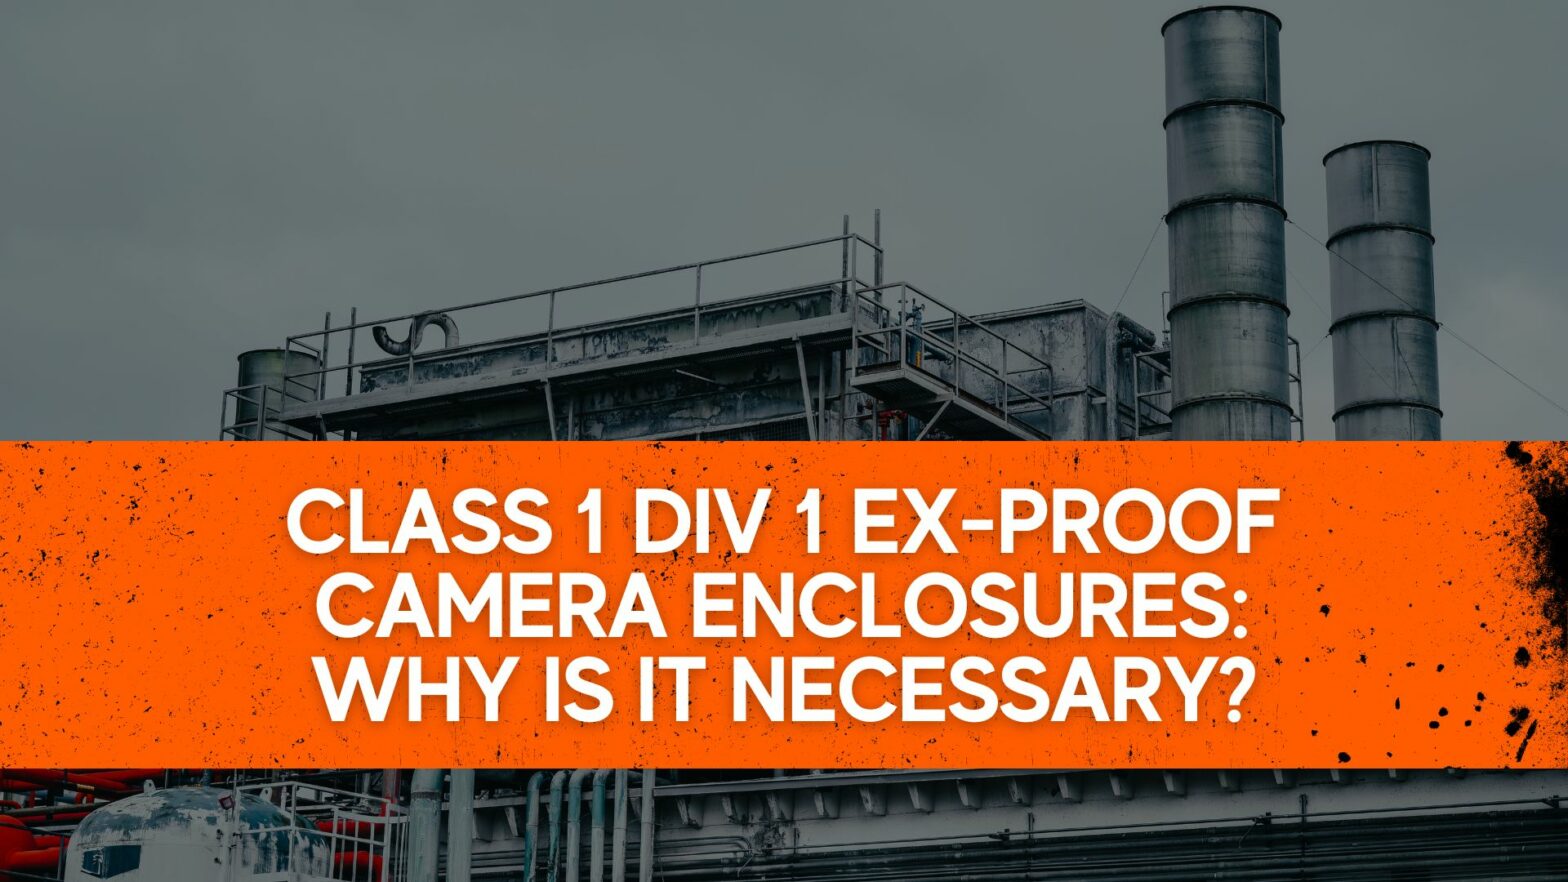 Class 1 Div 1 Ex-proof Camera Enclosures Why is it necessary